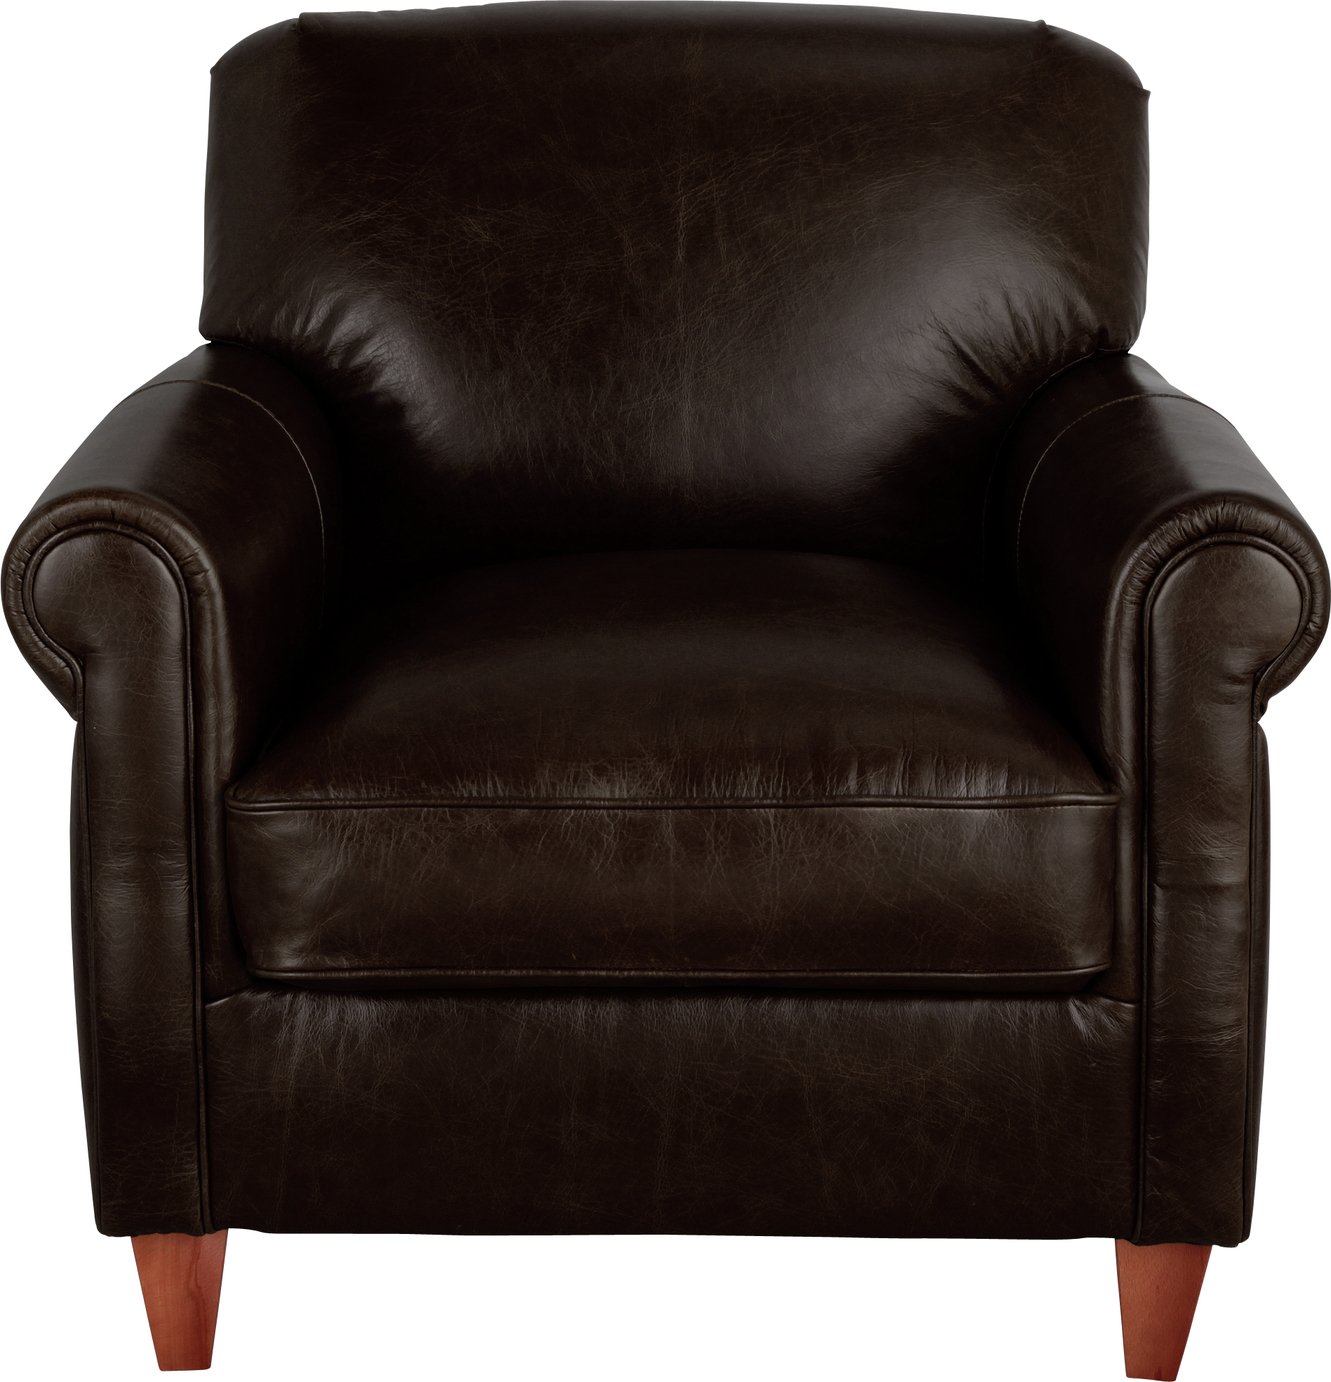 Argos Home Kingsley Leather Accent Chair -  Dark Brown